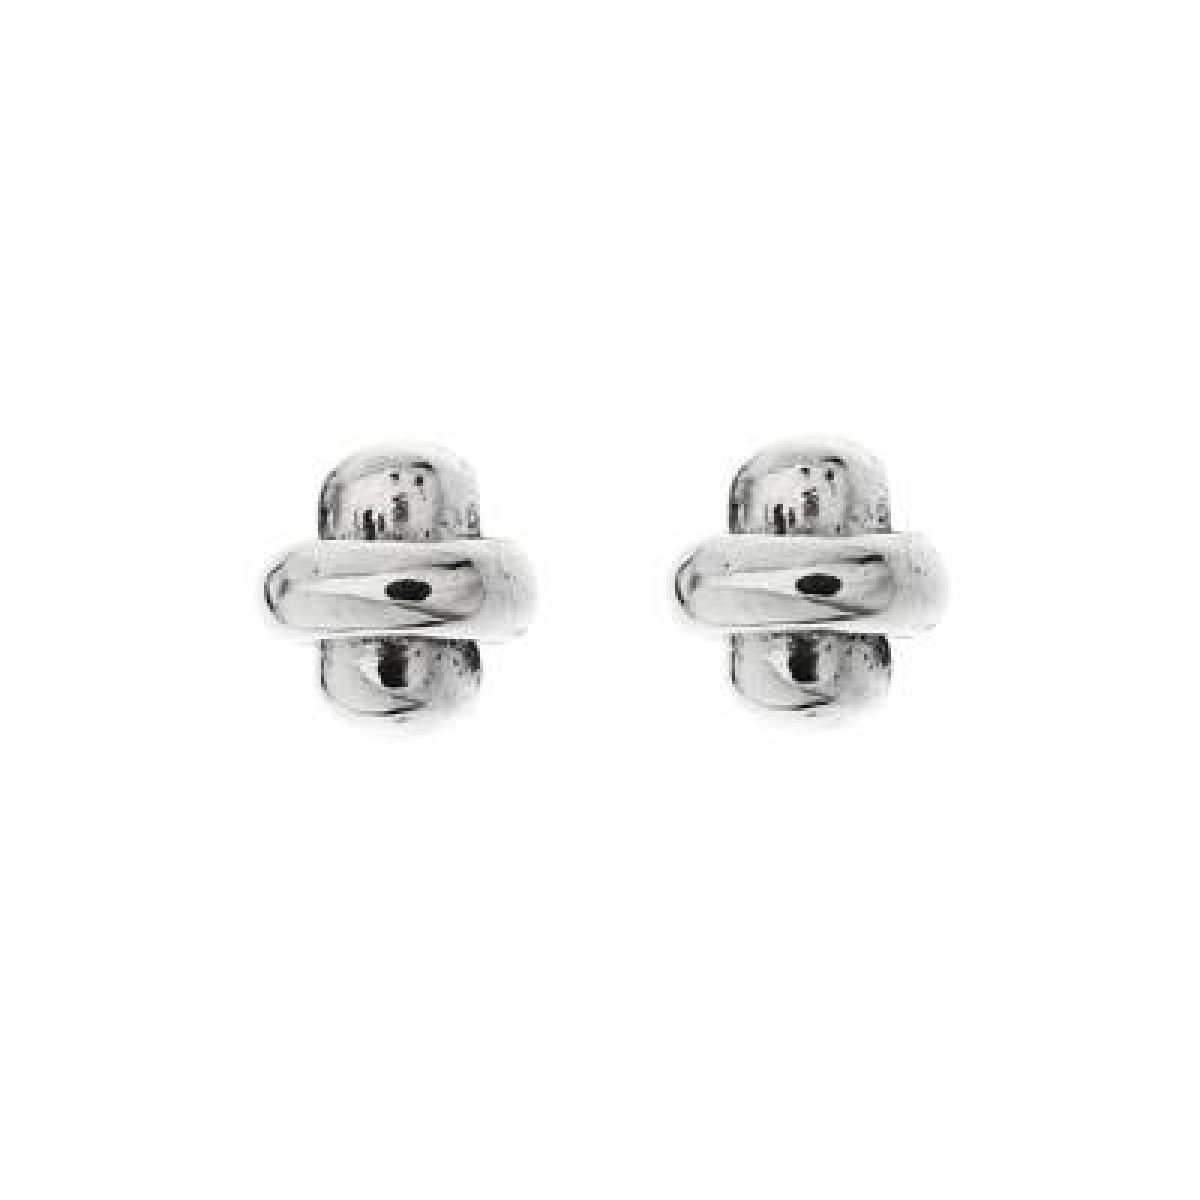 PURE STERLING SILVER EARRINGS MOUNTED TUBES PPP352 Plata Pura